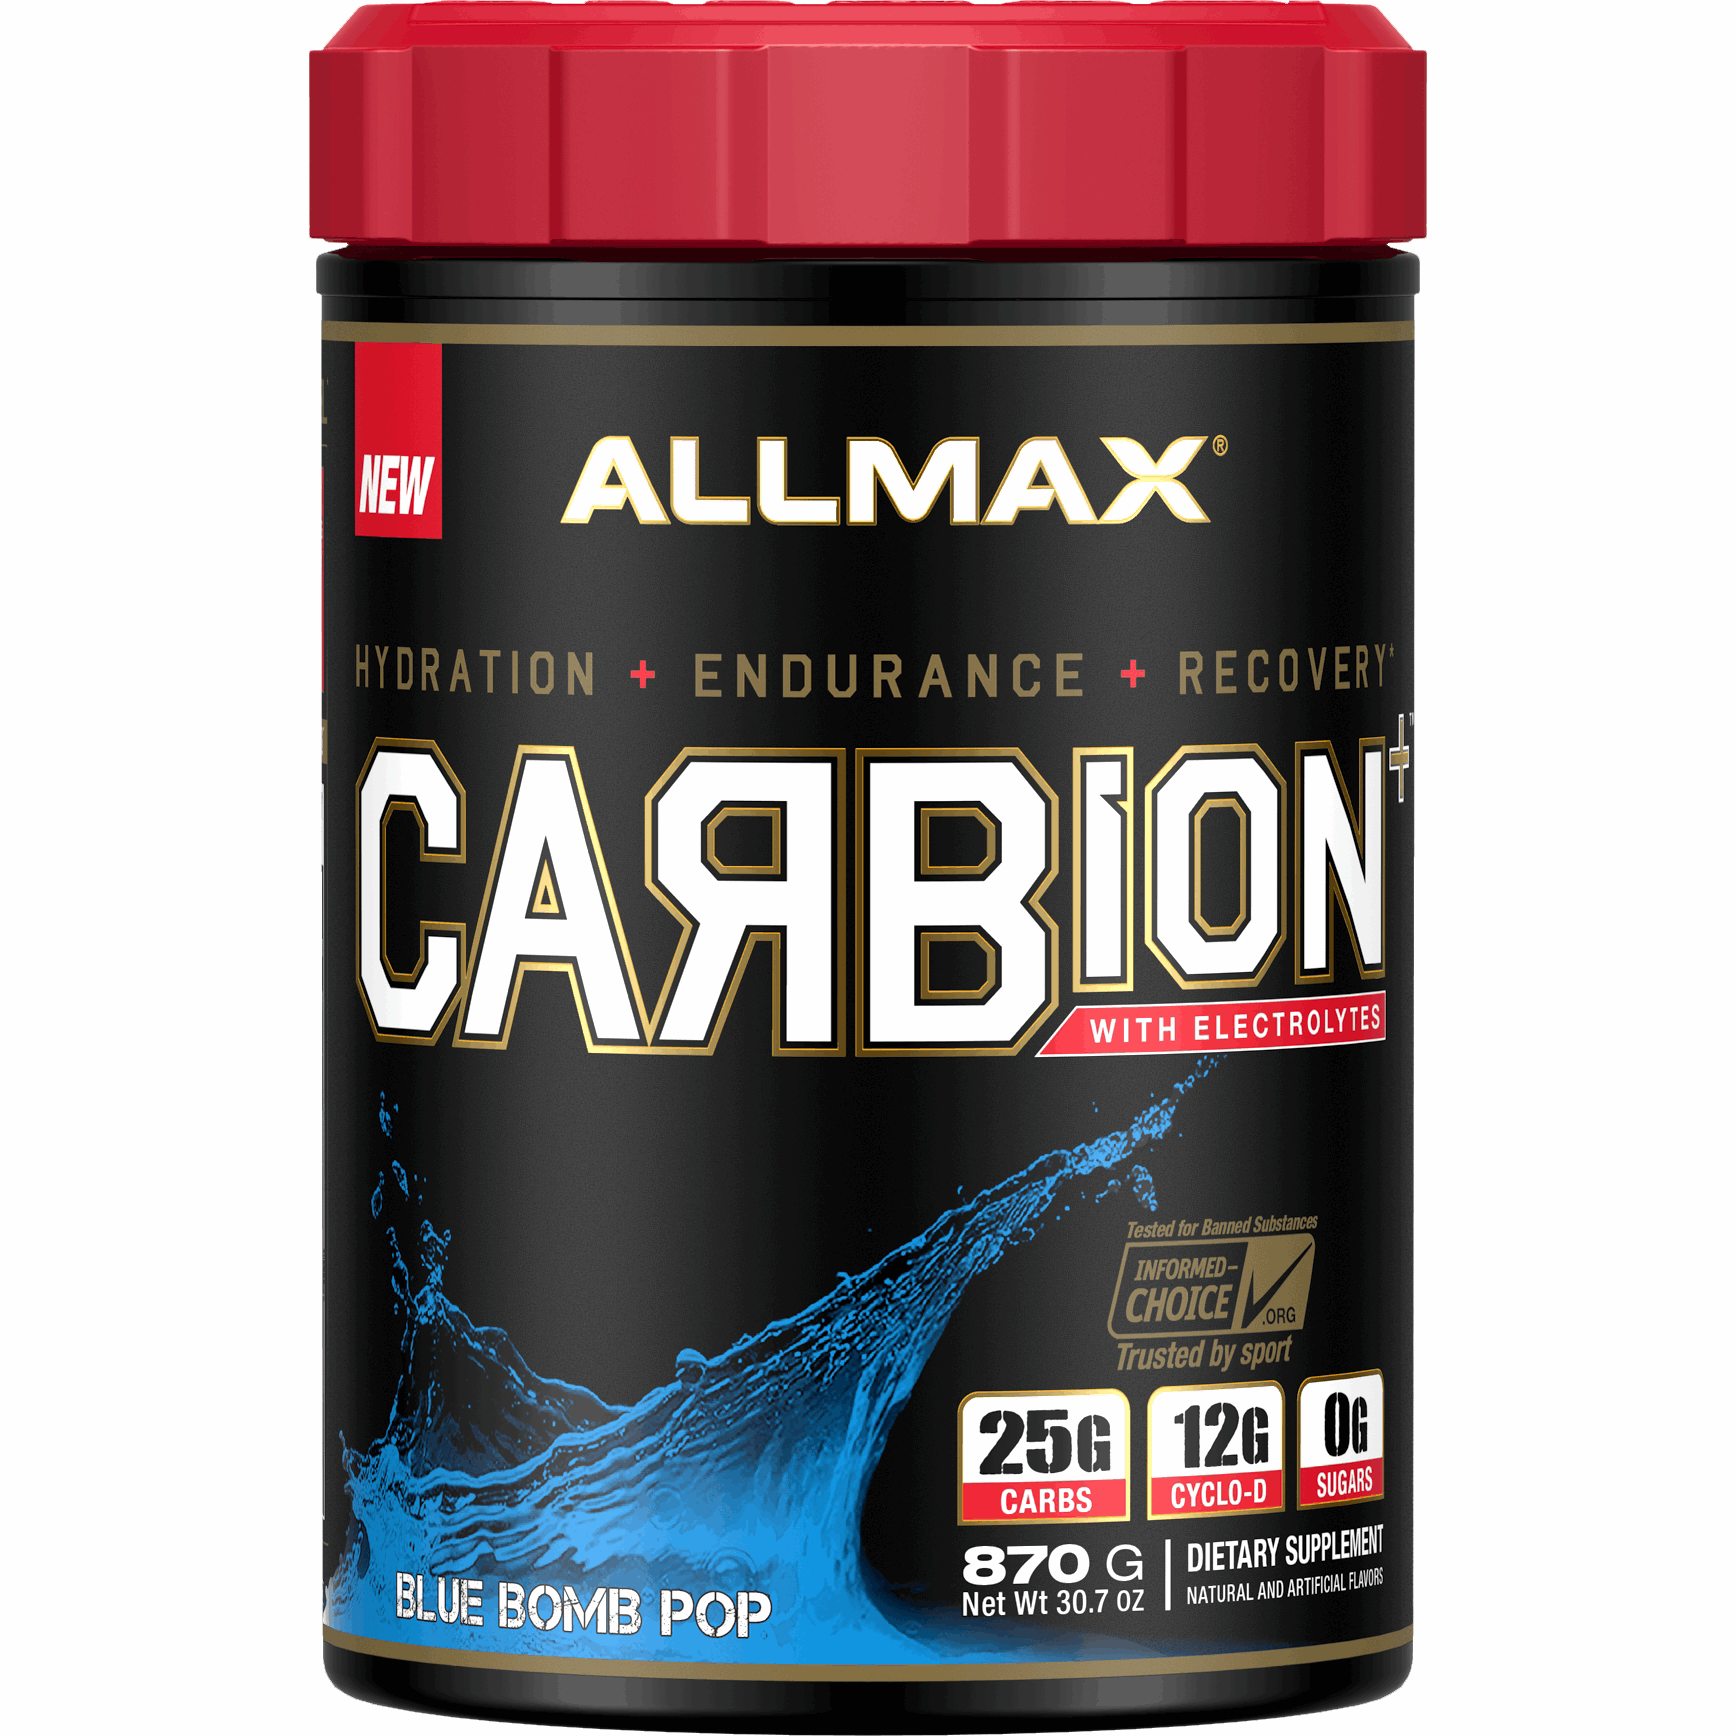 ALLMAX CARBION+Maximum Strength Electrolyte and Hydration Energy Drink (30 Servings) allmax-carbion-maximum-strength-electrolyte-and-hydration-energy-drink-30-servings Carbohydrates Blue Bomb Pop Allmax Nutrition